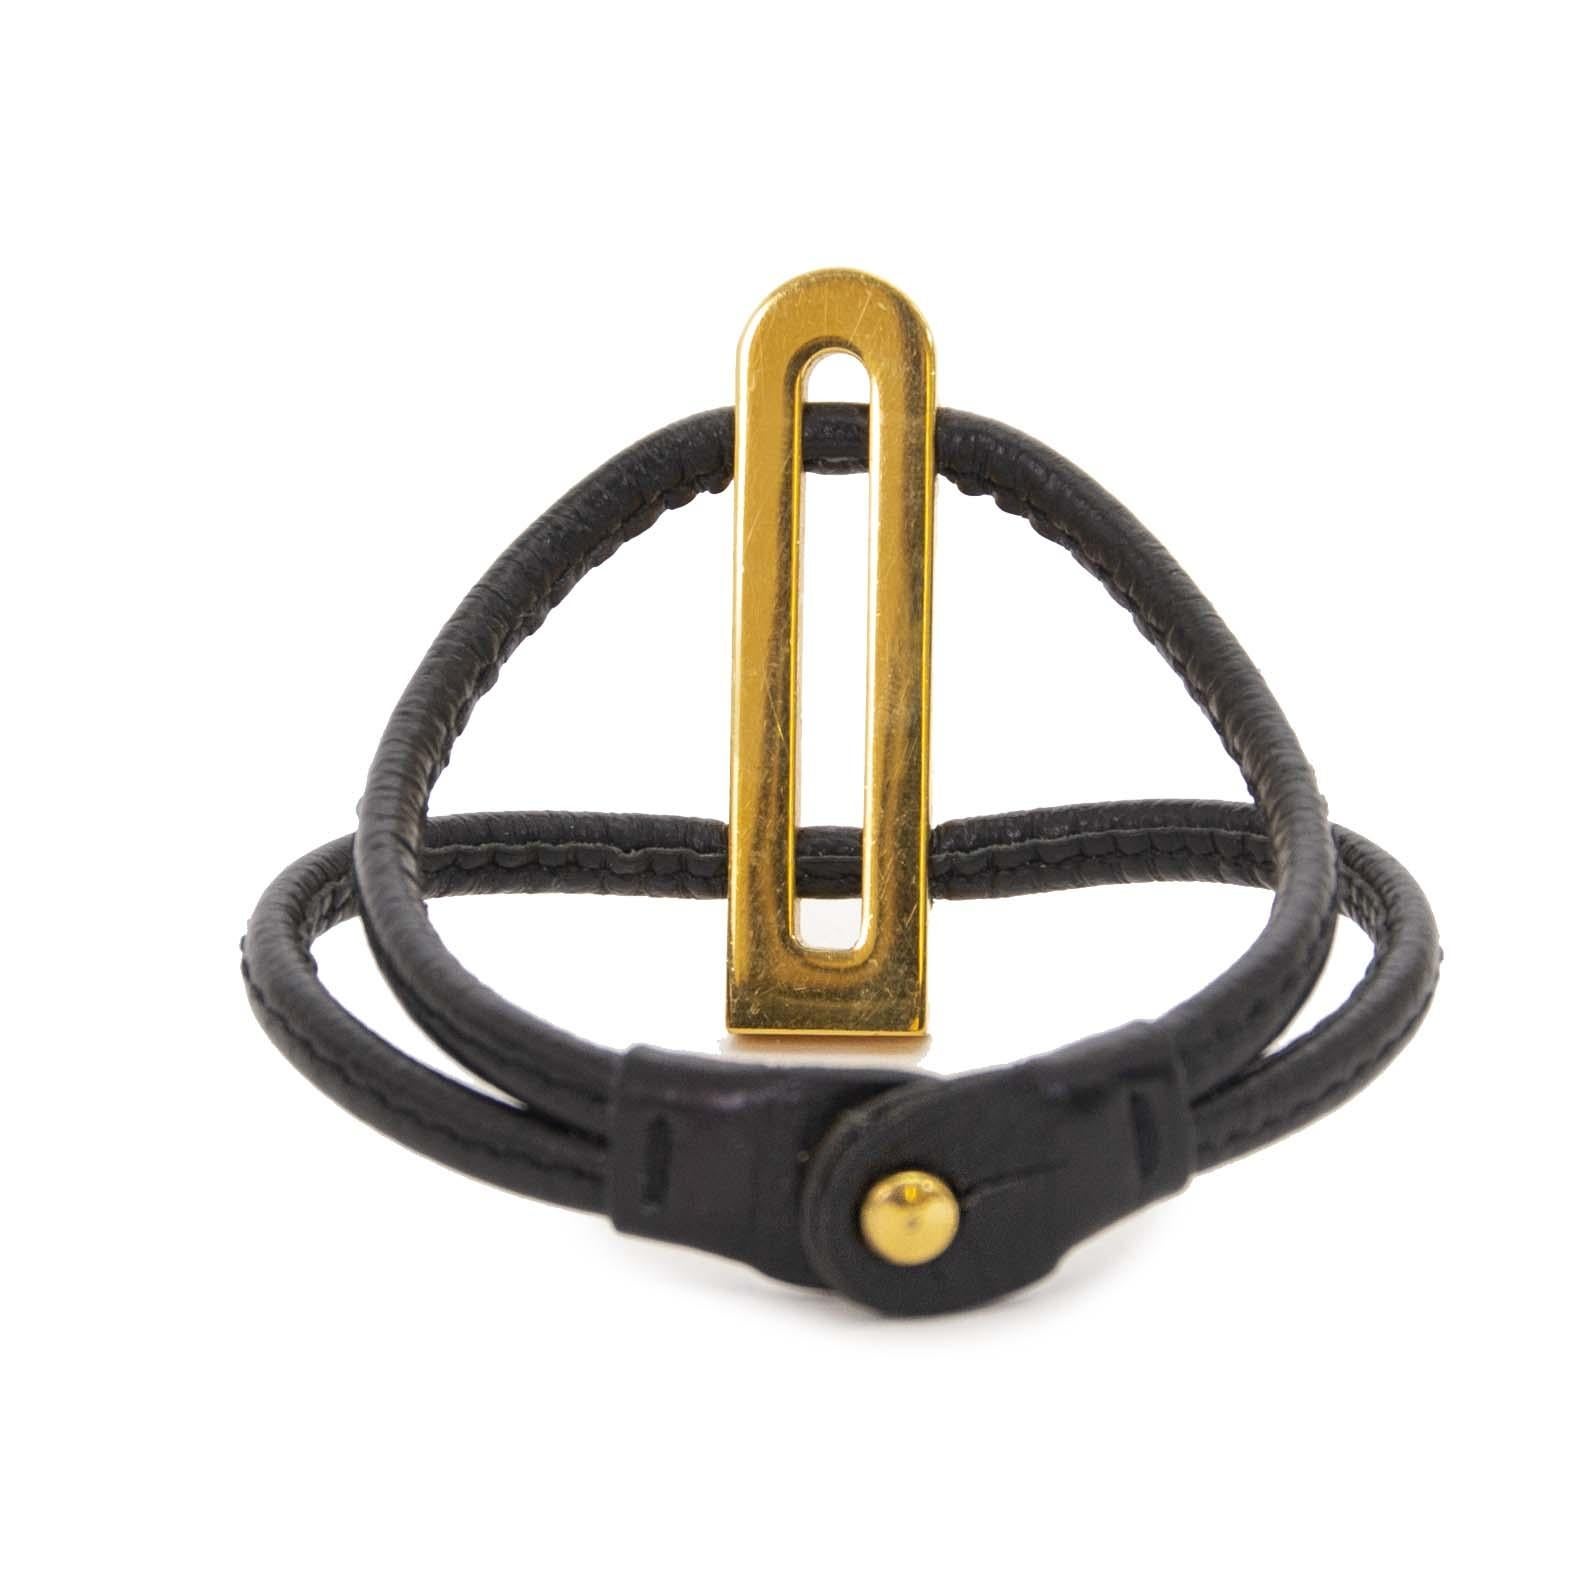 Very good condition

Delvaux Black Leather Gold D Bracelet

Add a touch of sophistication to your everyday look with this Delvaux bracelet.
The bracelet features two black leather straps and a gold-toned 'D' logo.